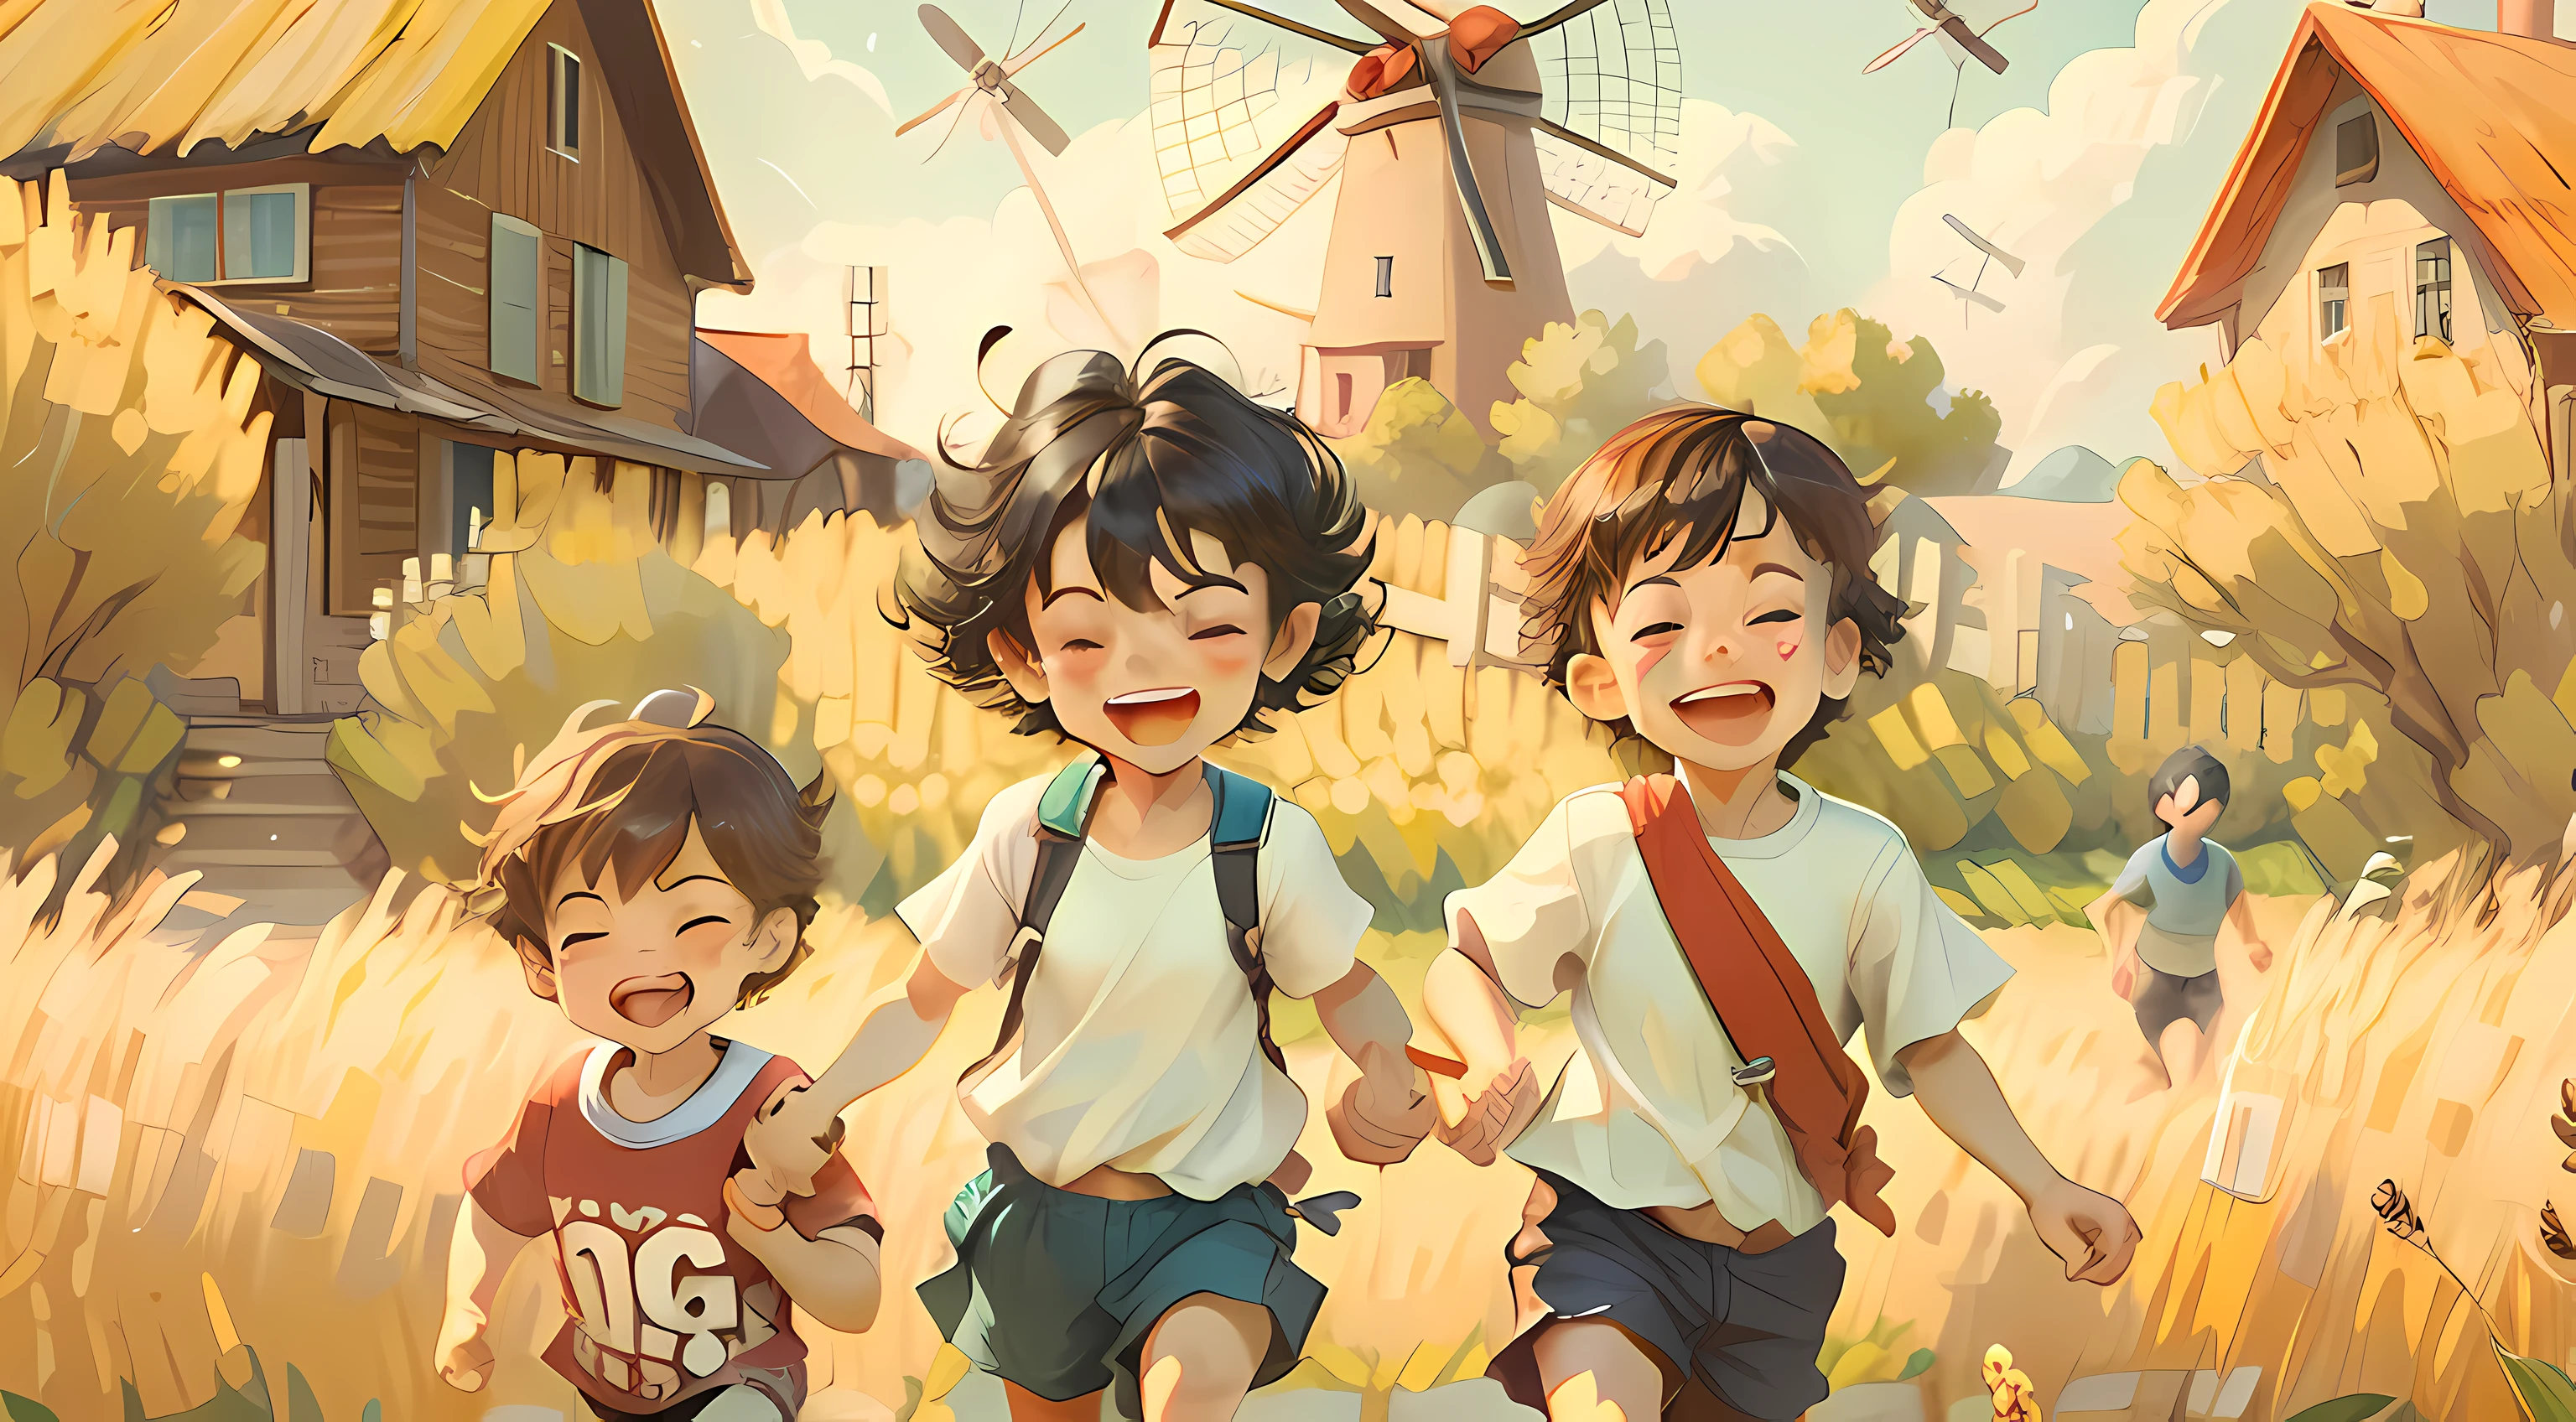 multiple boys, holding hands, multiple girls, sky, smile, shorts, running, A golden wheat field, outdoors, dress, short hair, 3boys, field, 2boys, closed eyes, 2girls, scenery, , cloud, windmill, house, black hair, shirt, open mouth, brown hair, happy_face, Tile brick house, blind box toy style